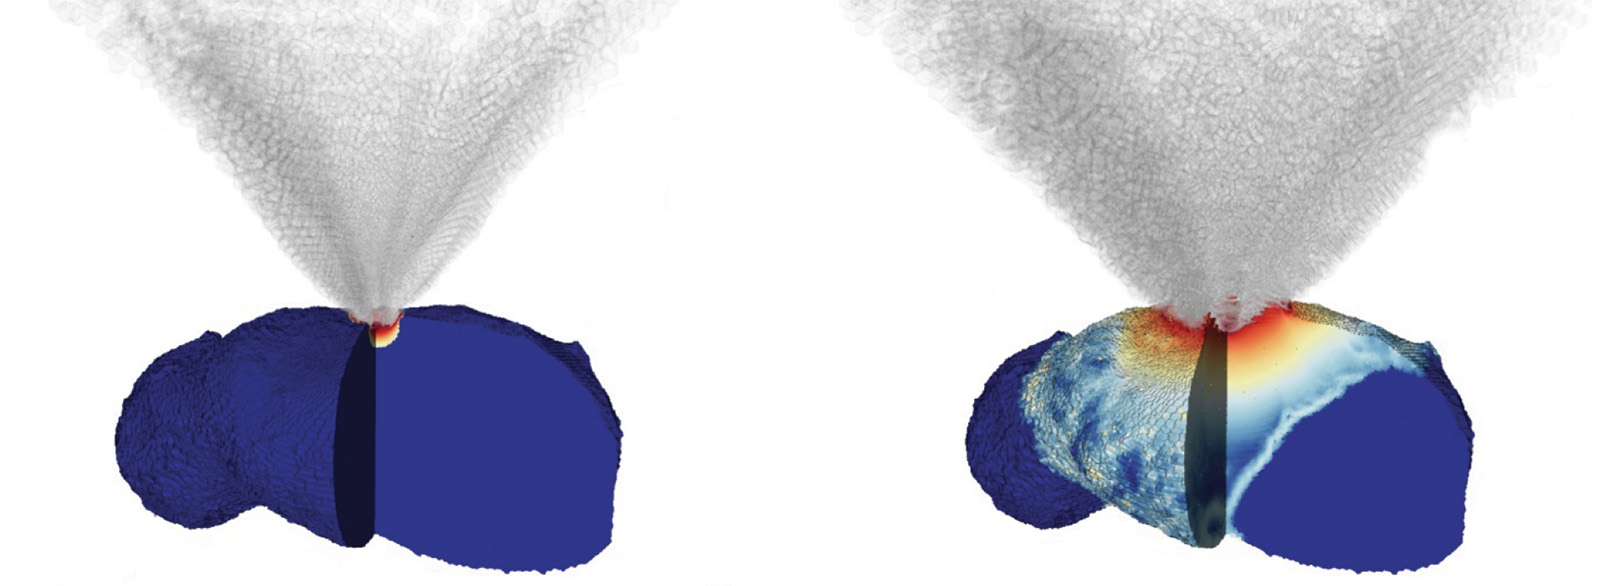 Two panels of potato-shaped asteroids in cross-section. Each is about 140-meters long, about 70- to 80-meters tall. Width is not represented. The long dimension is horizontal, with a crash site at center top. There’s no increased deformation (plastic strain), except within about 10 meters of the crater site, in the solid asteroid. The weak asteroid shows strain throughout its depth below the crash site and the strain gradient has less intensity outward from the crash, covering half the length of the asteroid at top and about a quarter the length along the bottom (opposite the crash). 